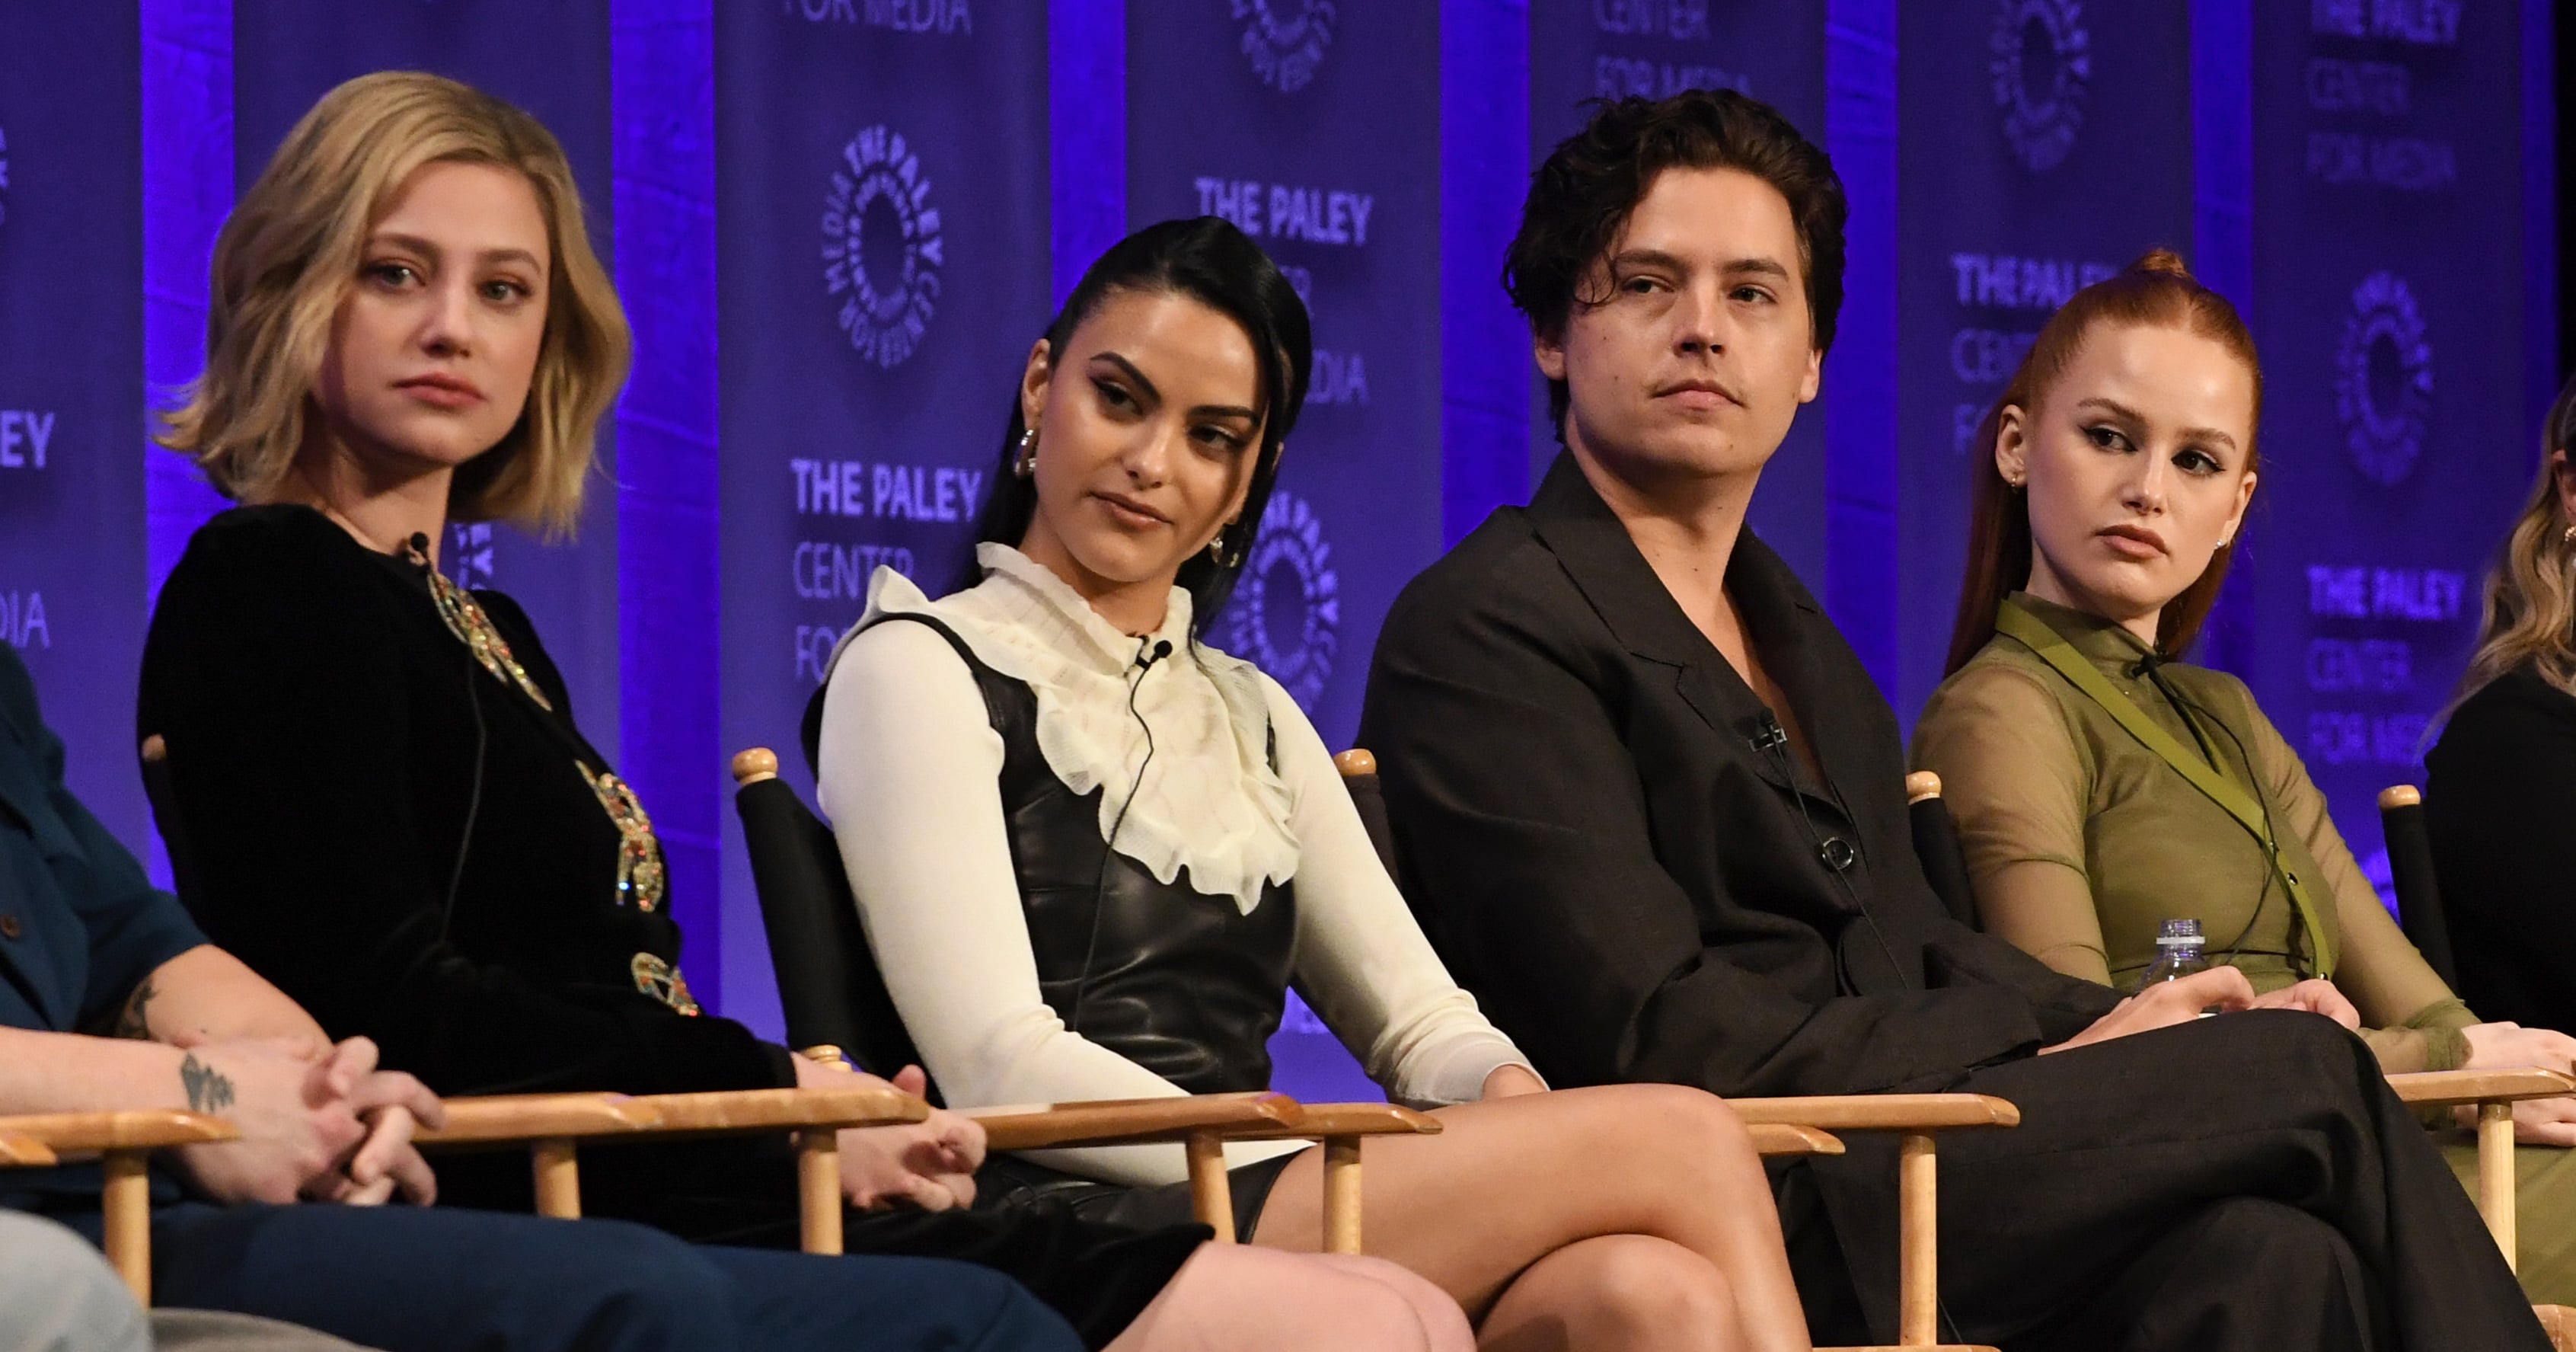 The Cast of 'Riverdale' Brings to Life Some Internet Memes